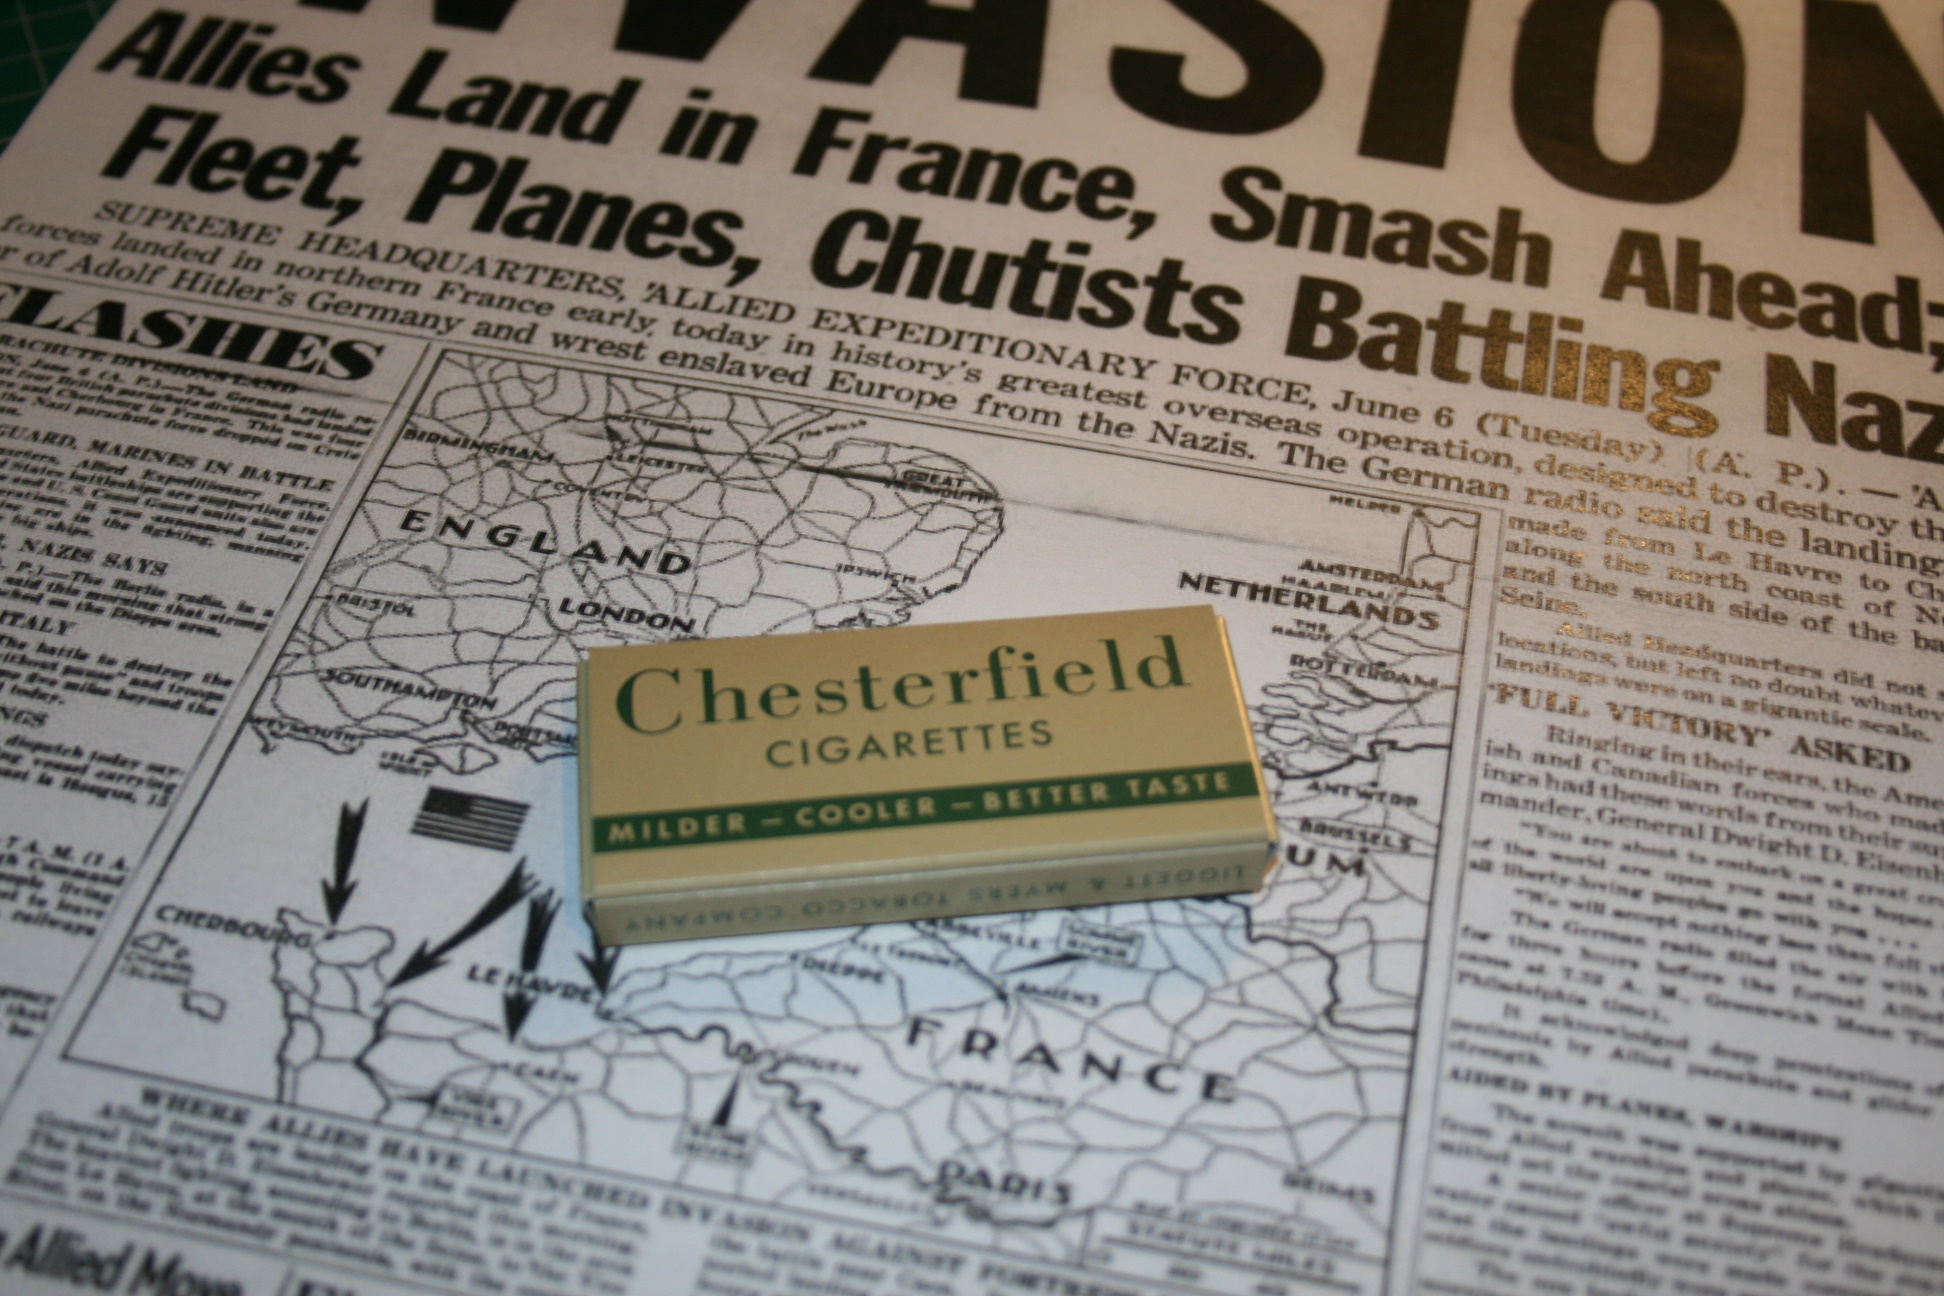 Chesterfield cigarette packet - K ration issue